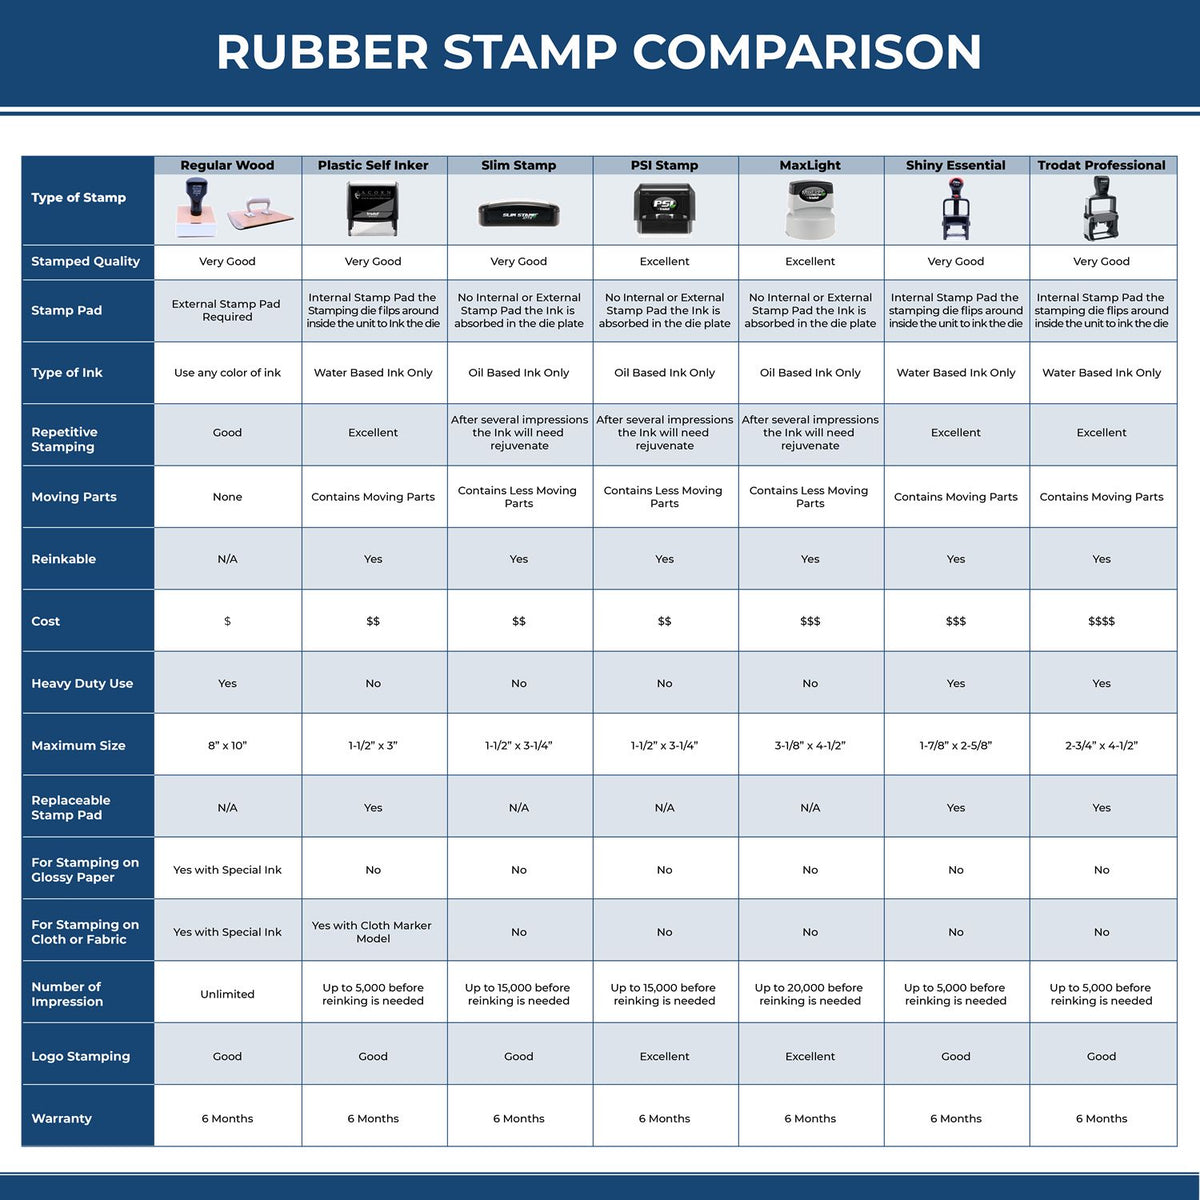 Large Package List Enclosed Rubber Stamp 4139R Rubber Stamp Comparison